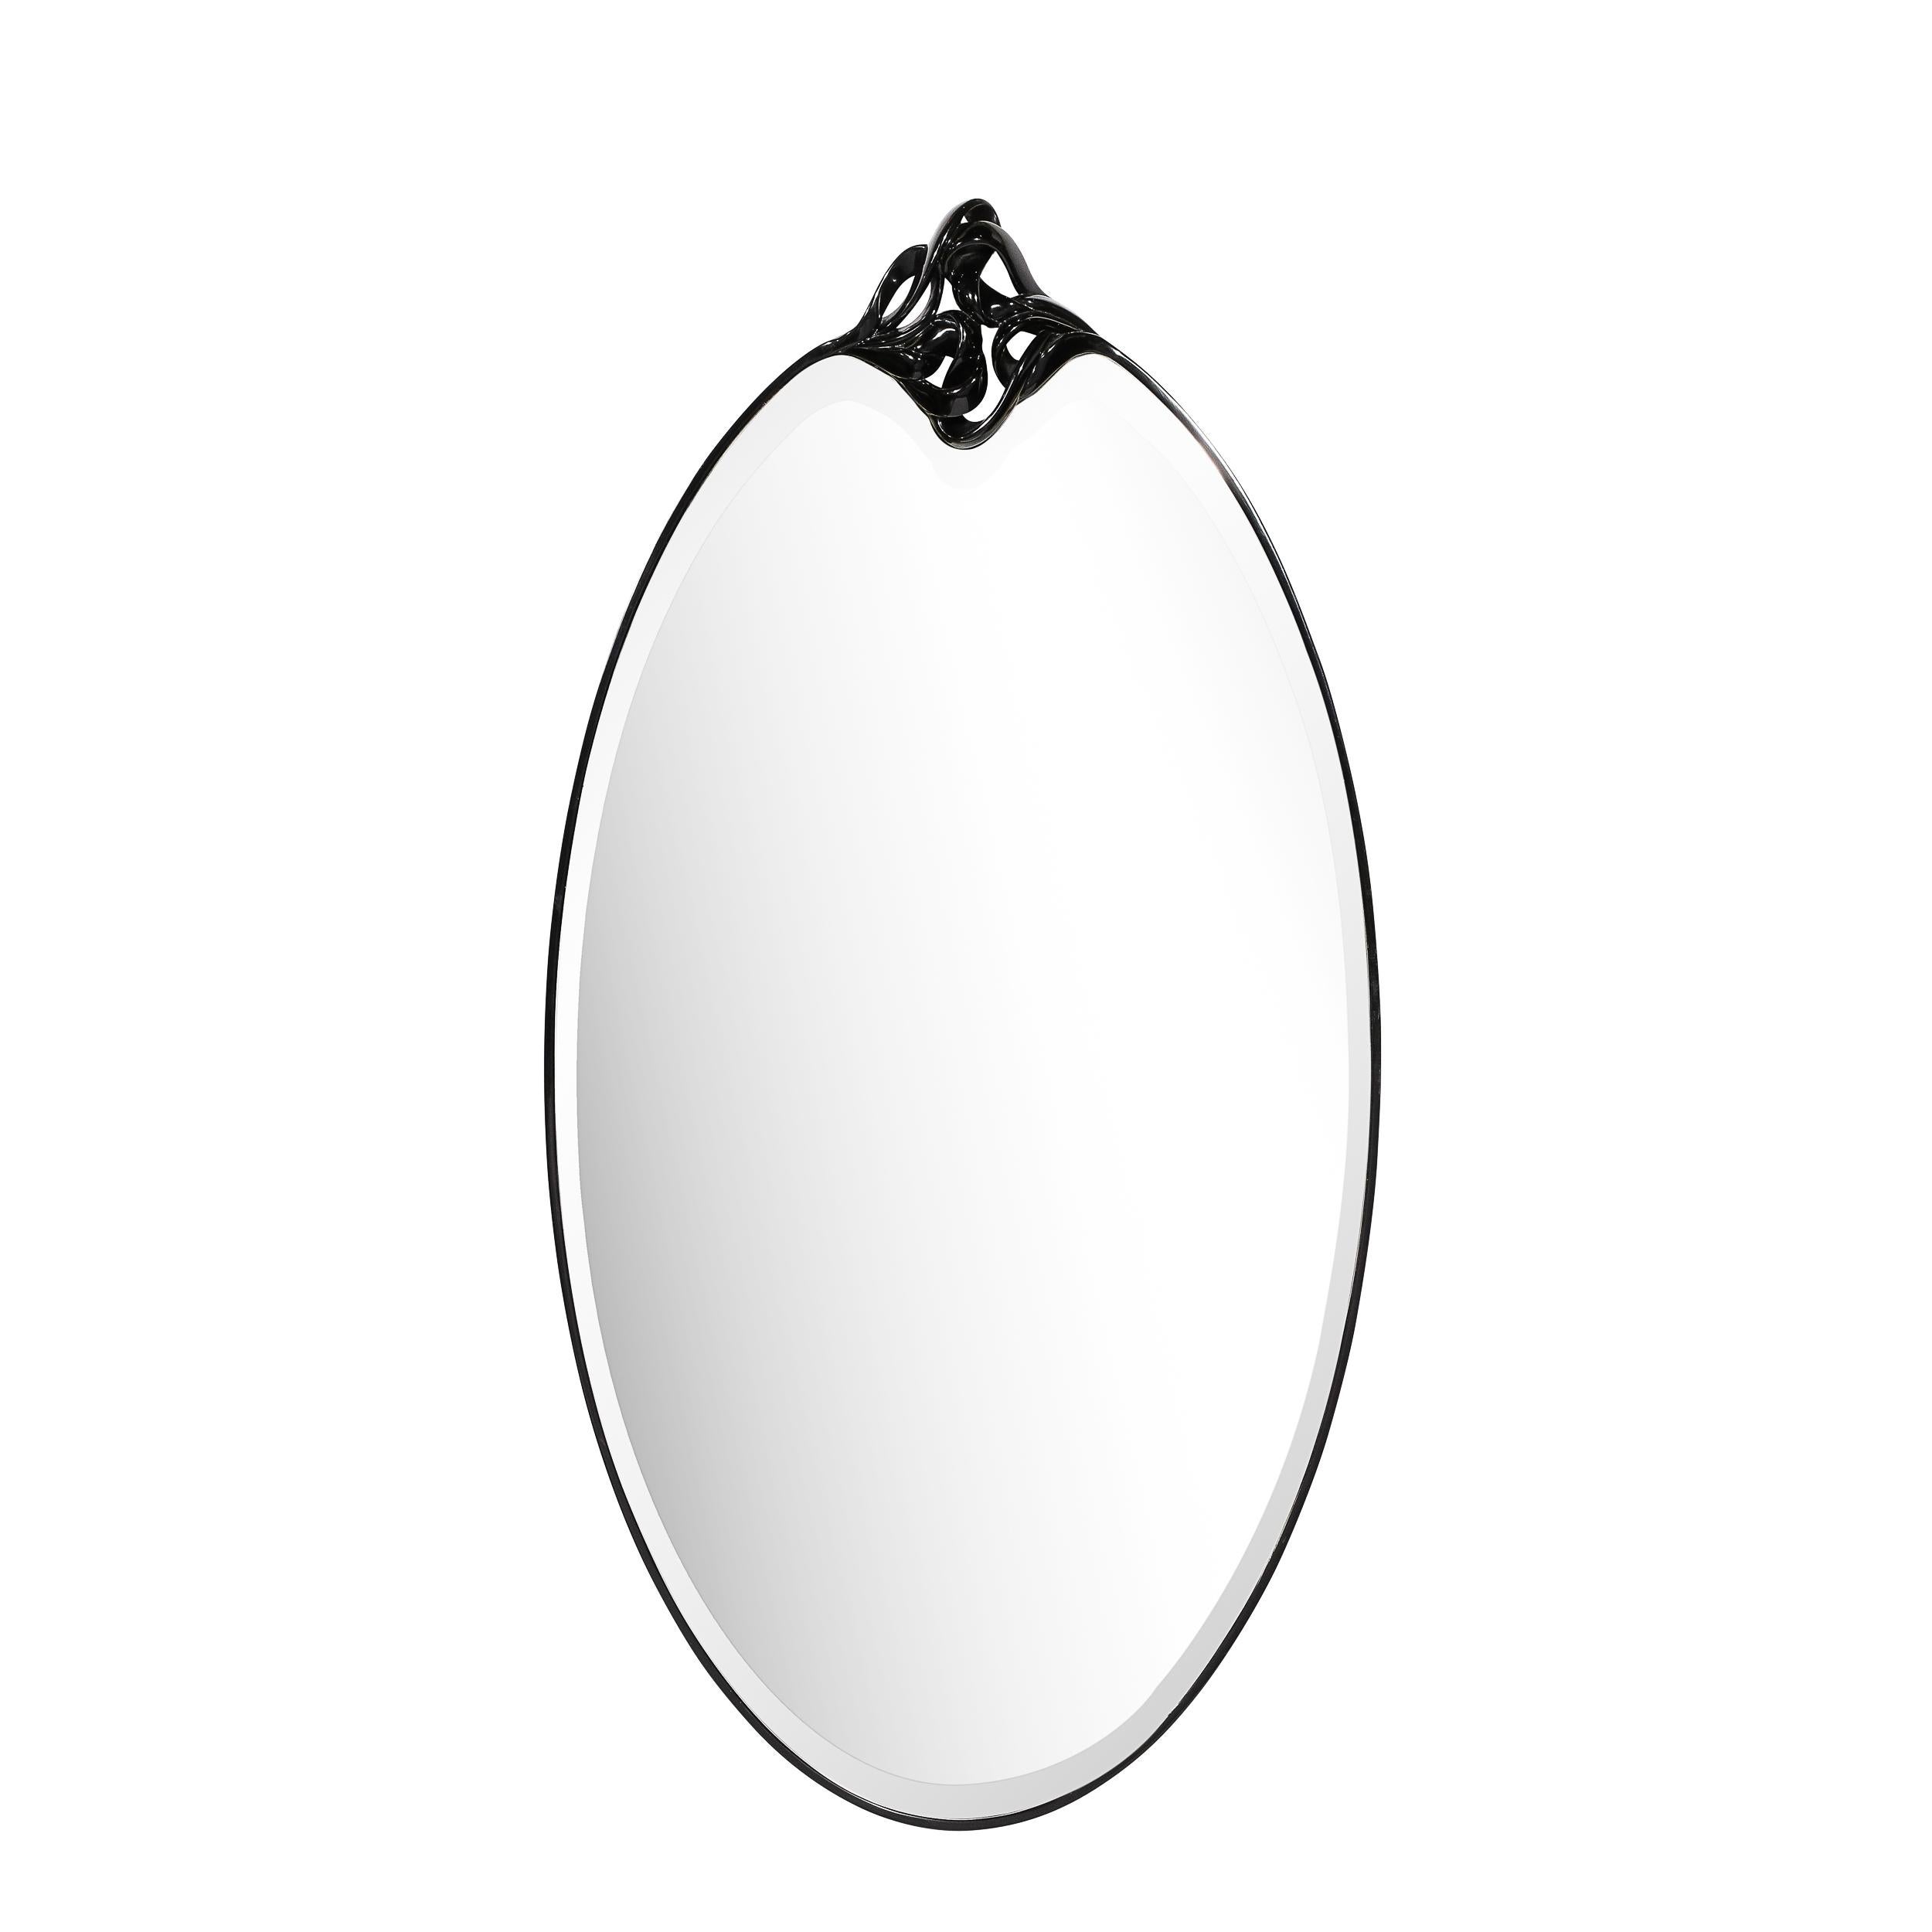 This stunning pair of Mid-Century Modern wall mirrors were realized in the United States during the latter half of the 20th Century. They feature ovoid shapes with clear mirror centers wrapped in lustrous black resin. Crowning the top of each are